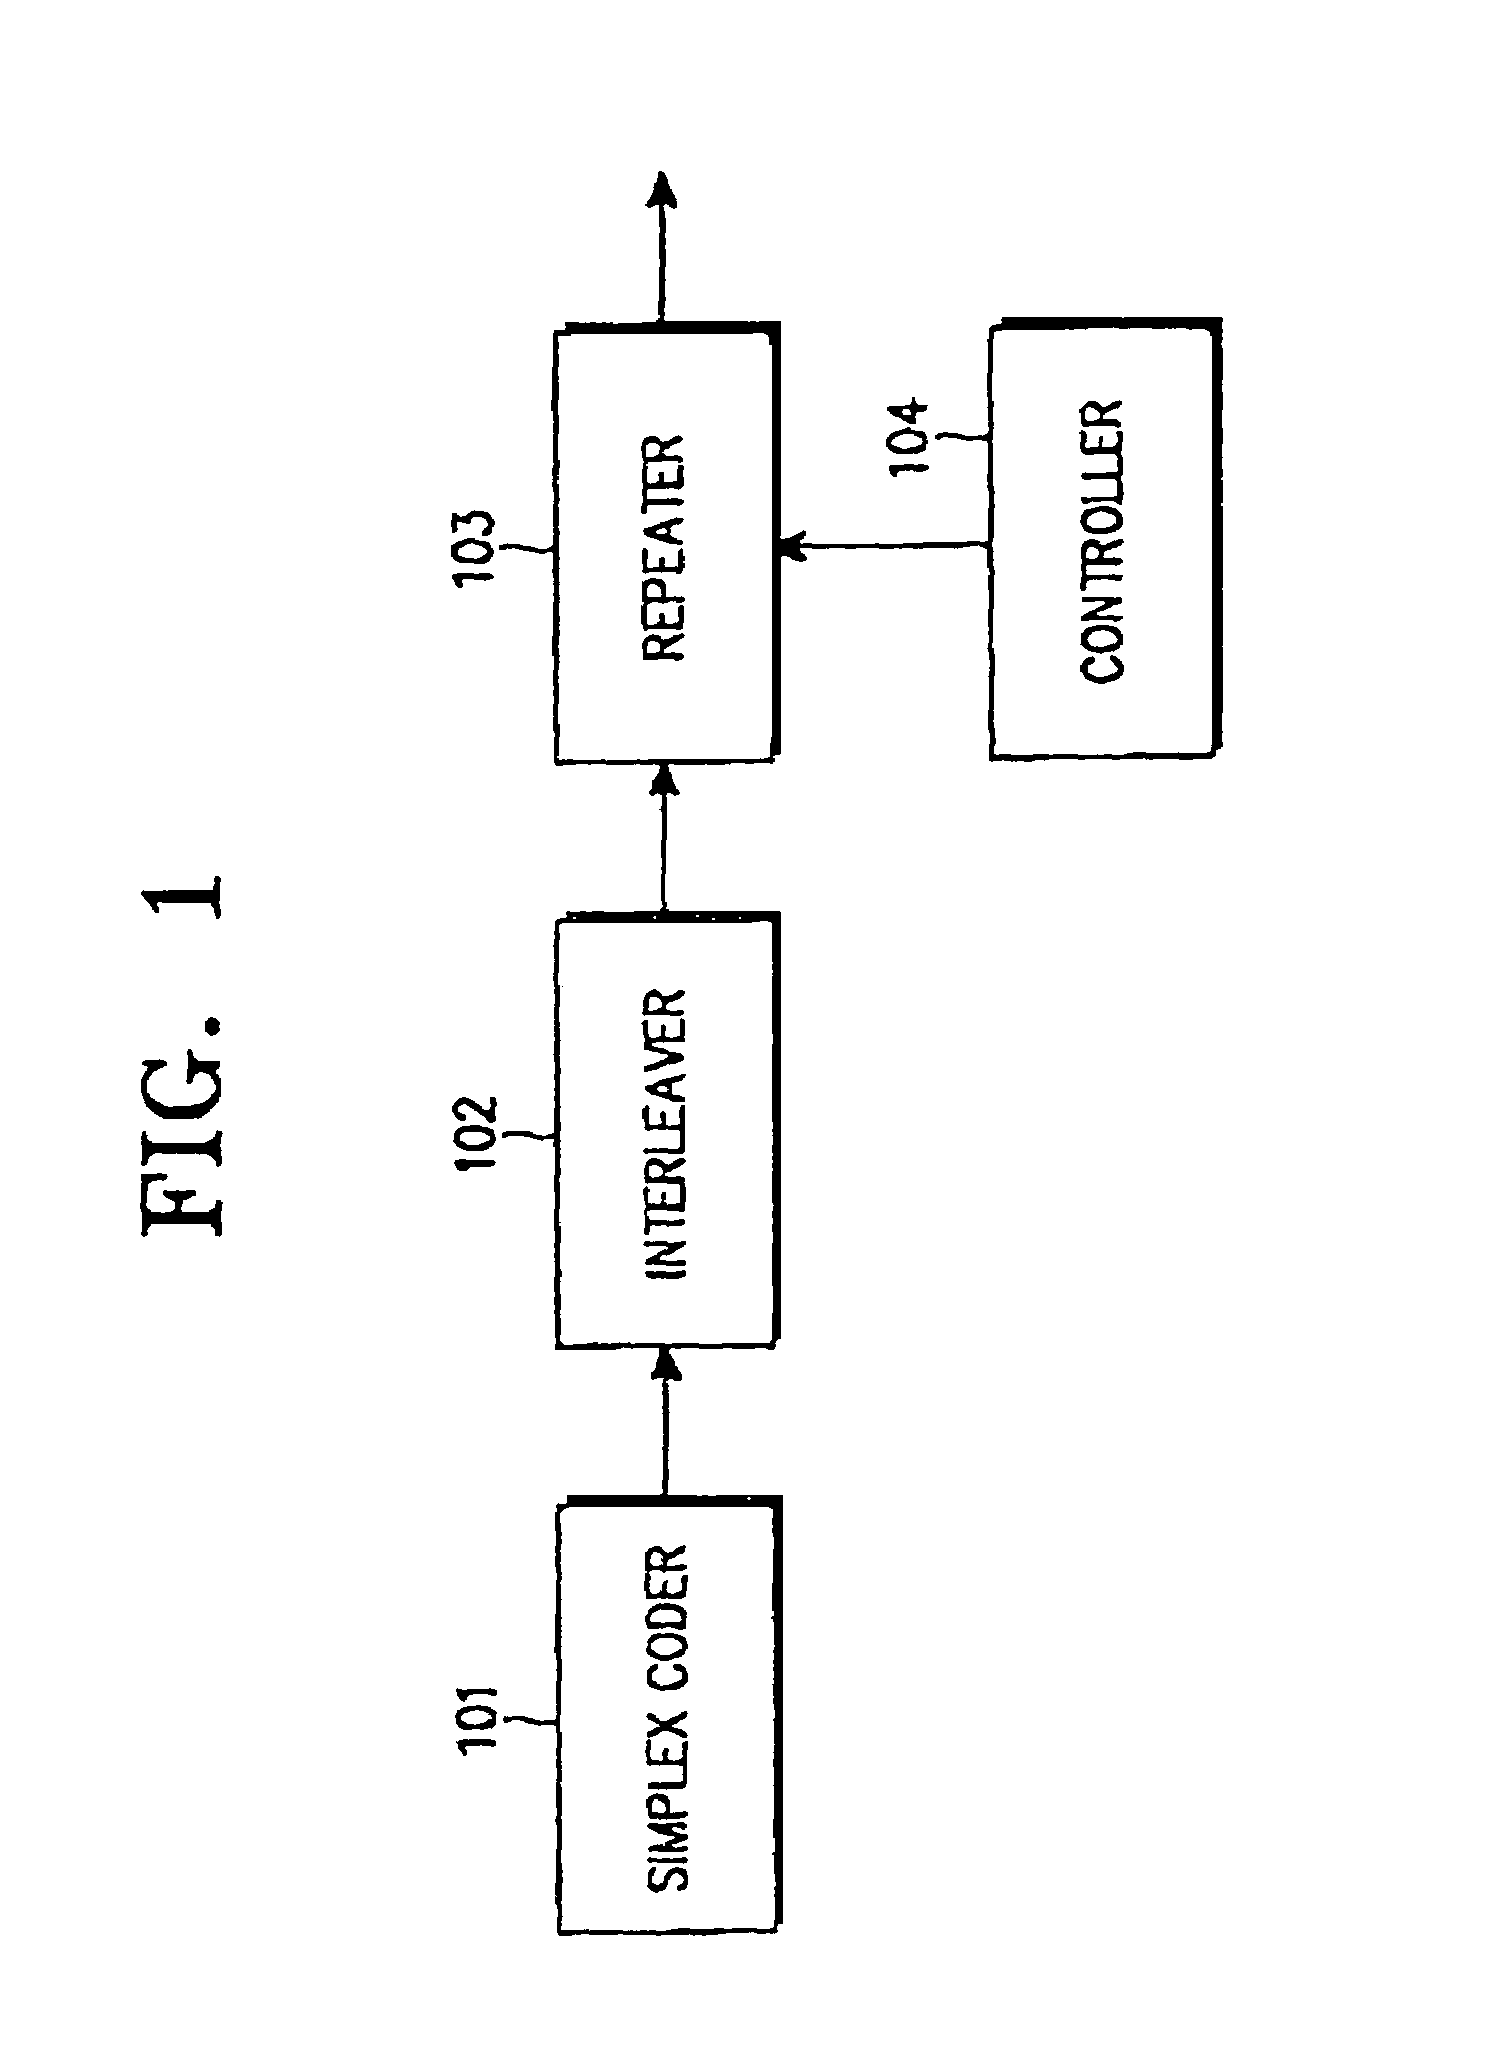 Apparatus and method for generating (n,3) code and (n,4) code using simplex codes